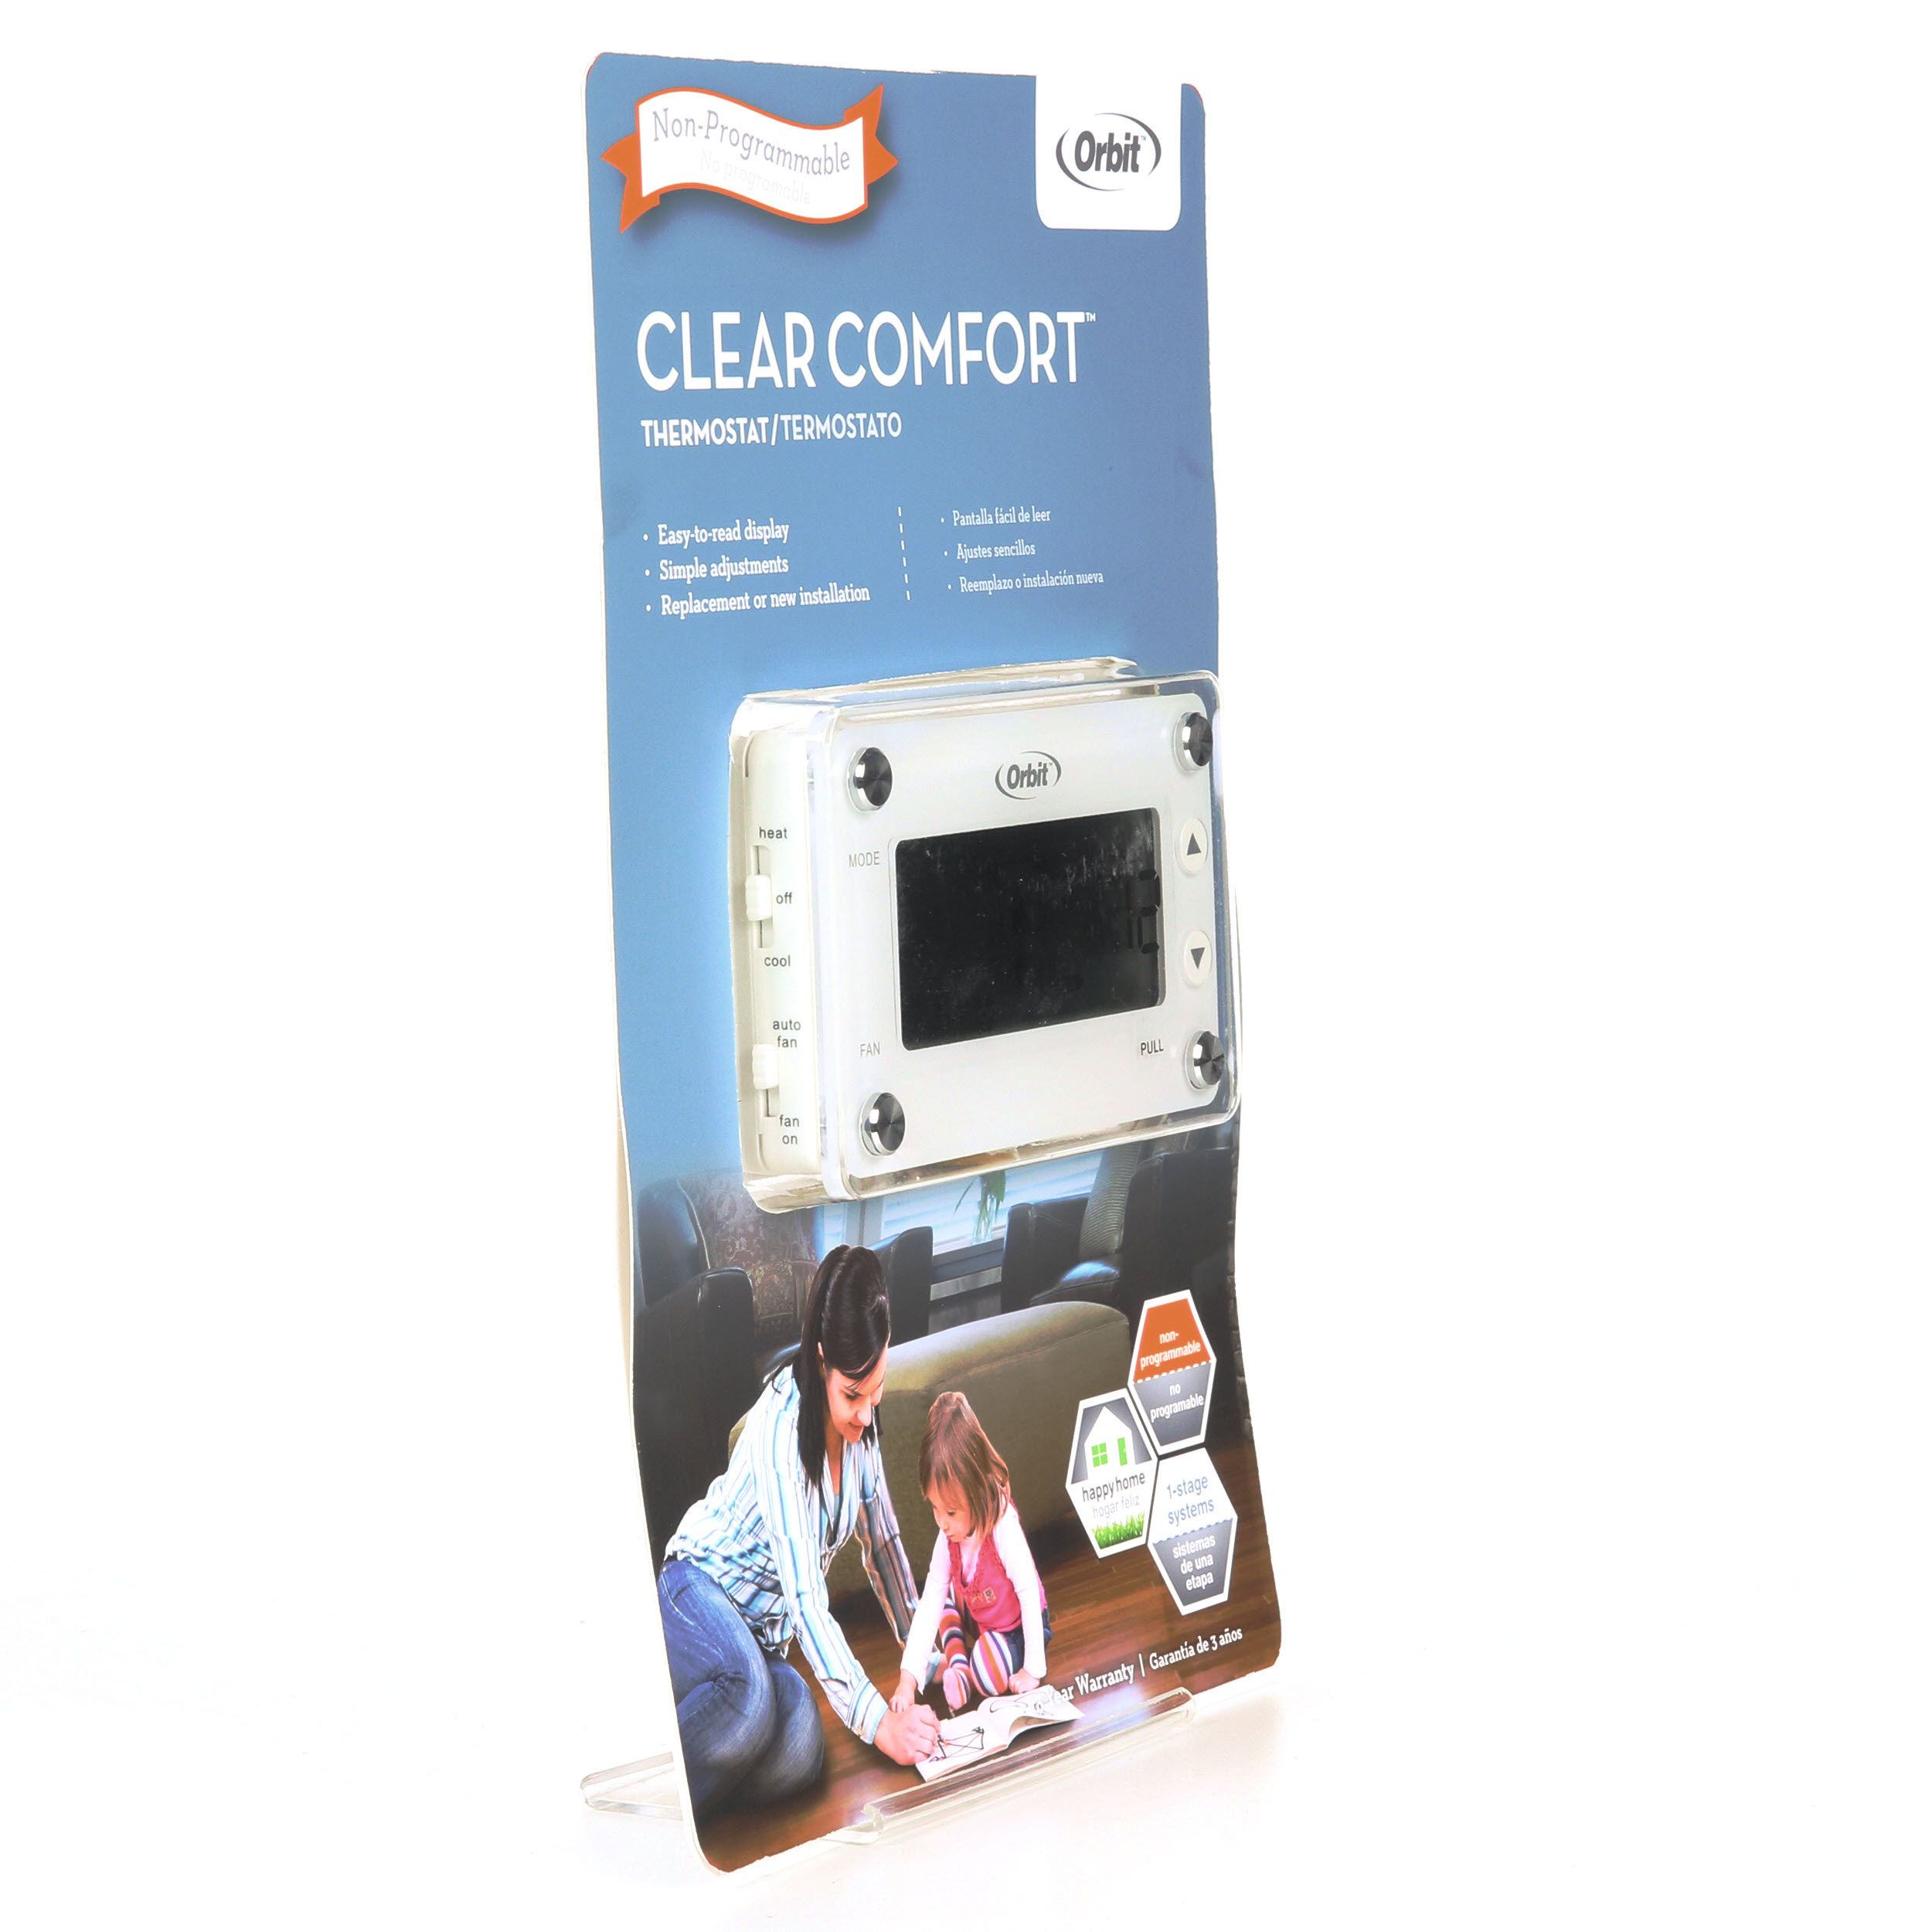 Easy-to-Read Display Clear Comfort Programmable Thermostat with Large 